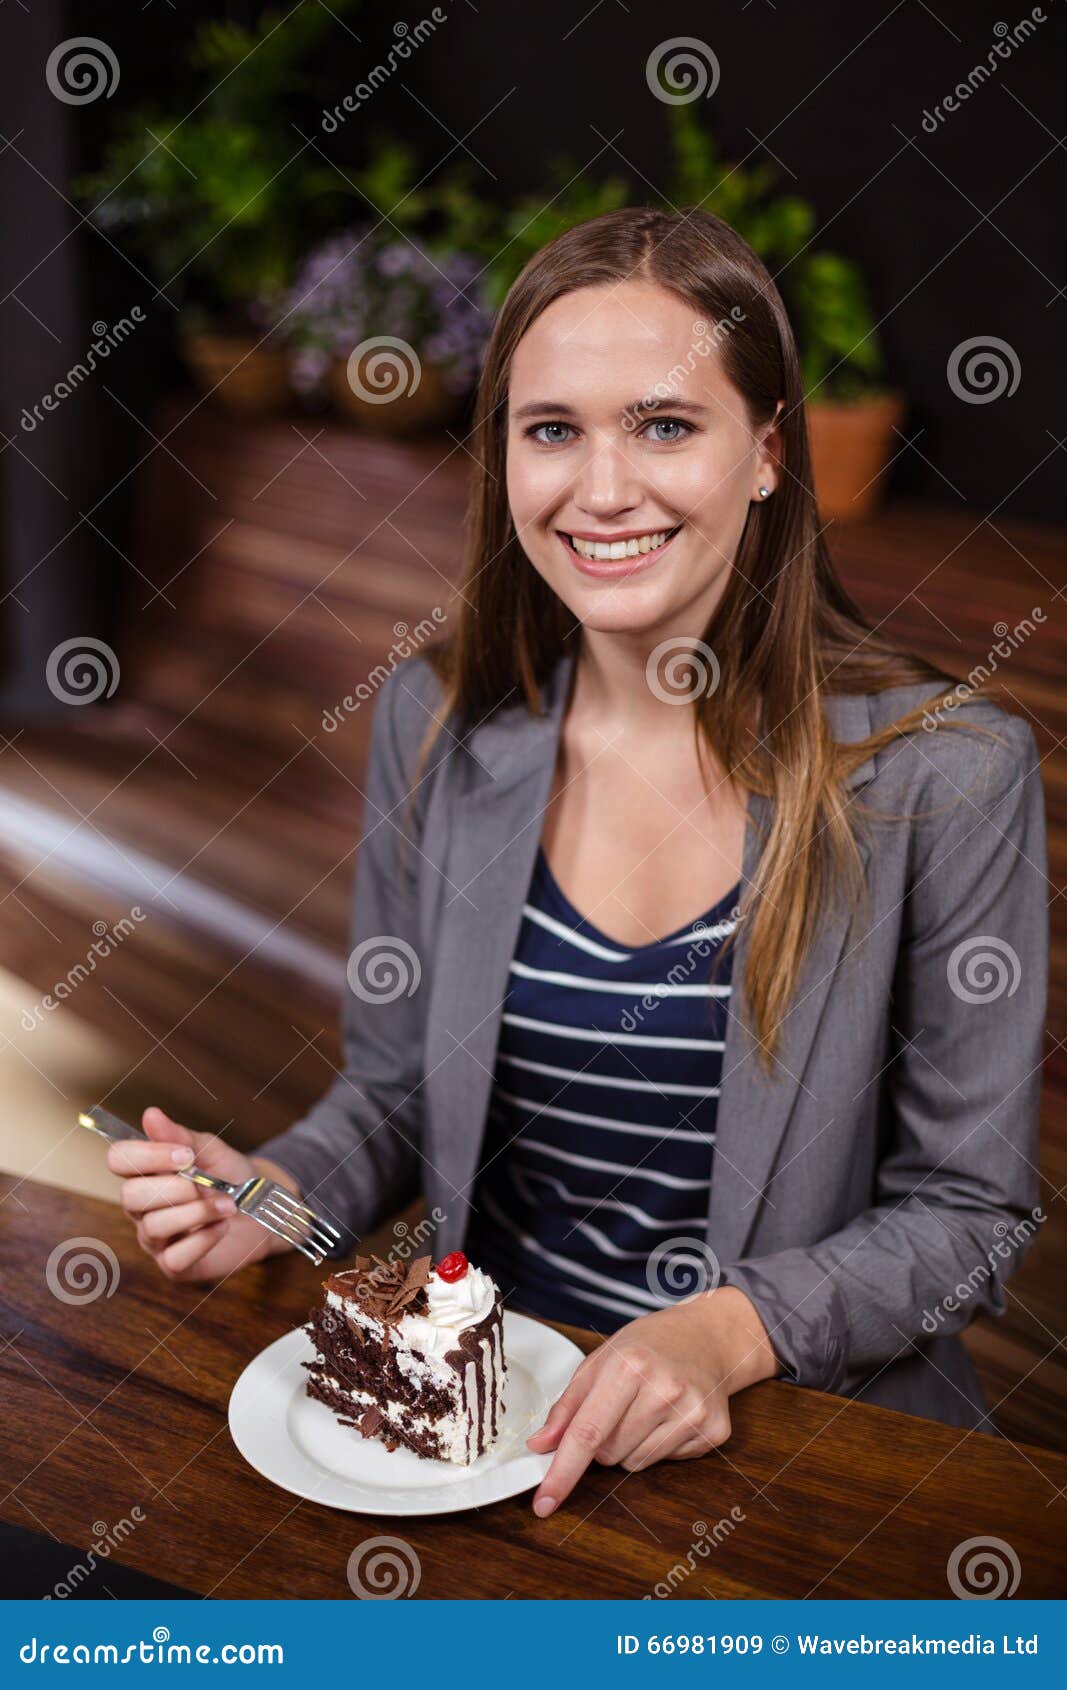 Woman About To Eat A Piece Of Cake Stock Image Image Of Camera Happy 66981909 